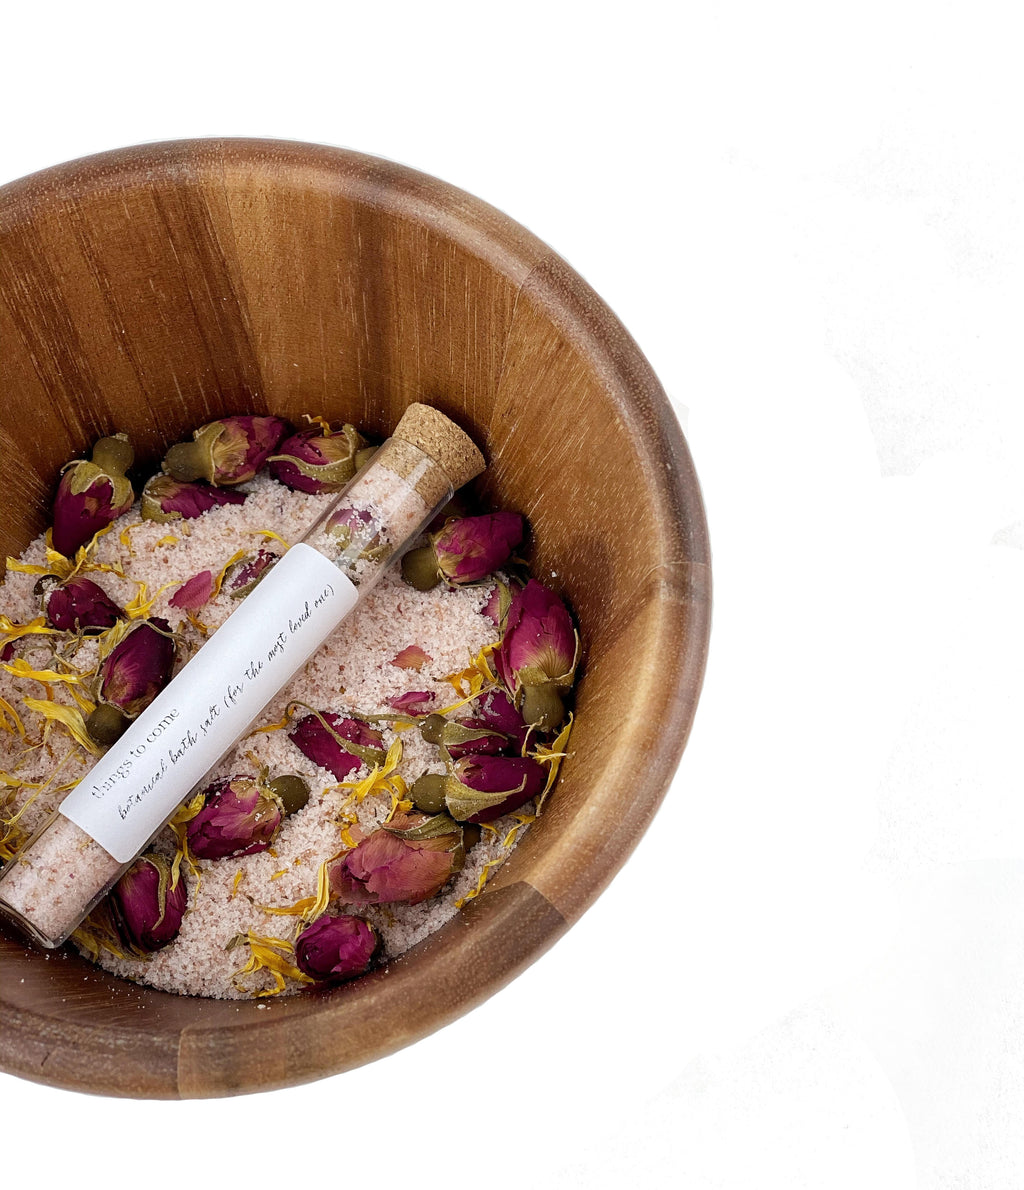 Botanical Infused Bath Salt For The Most Loved One